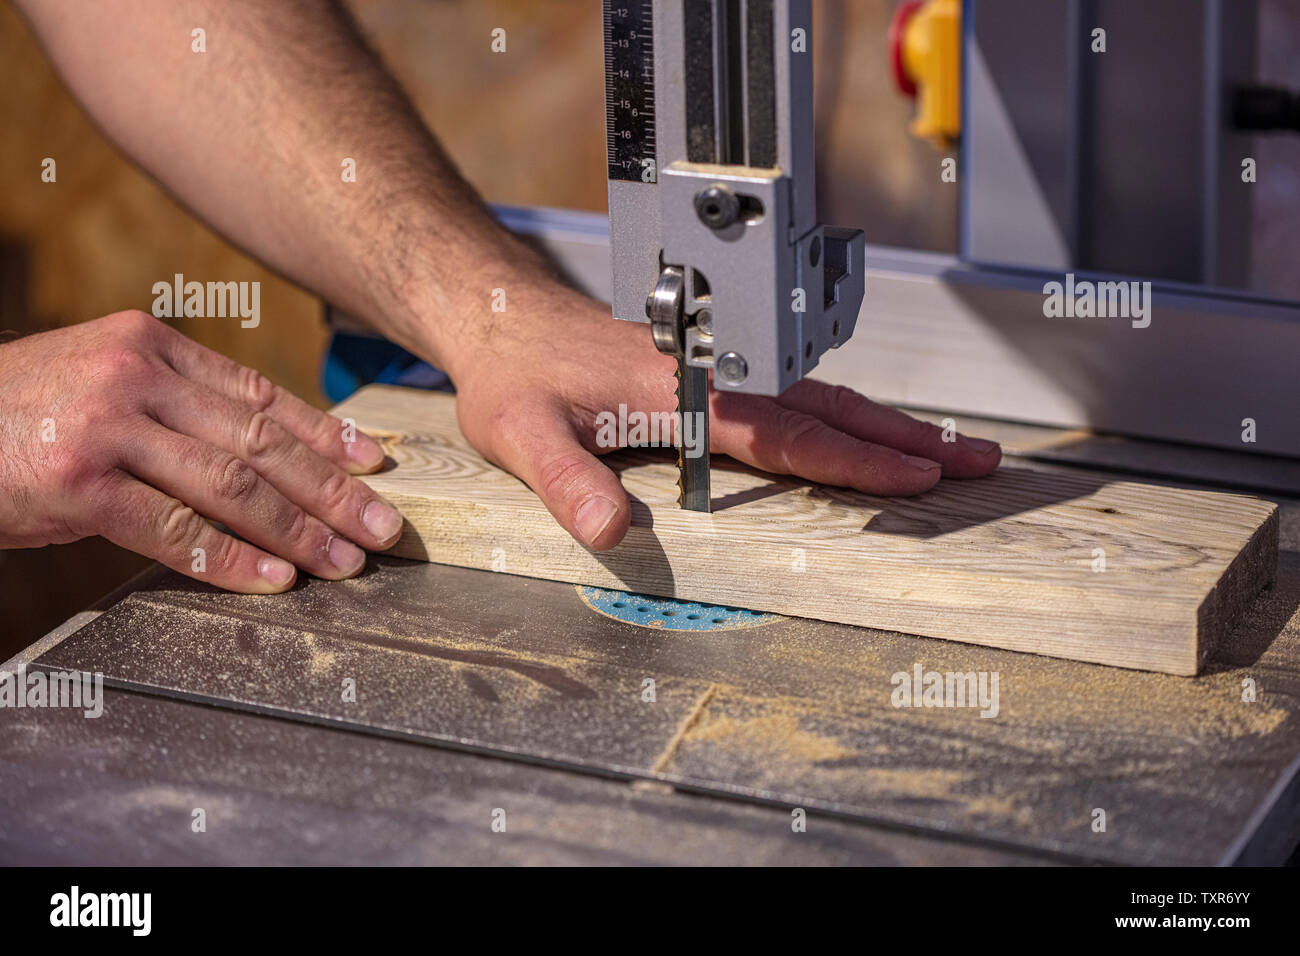 detail of a carpenter's hand next to a band saw blade. concept of safety at work and accidents Stock Photo